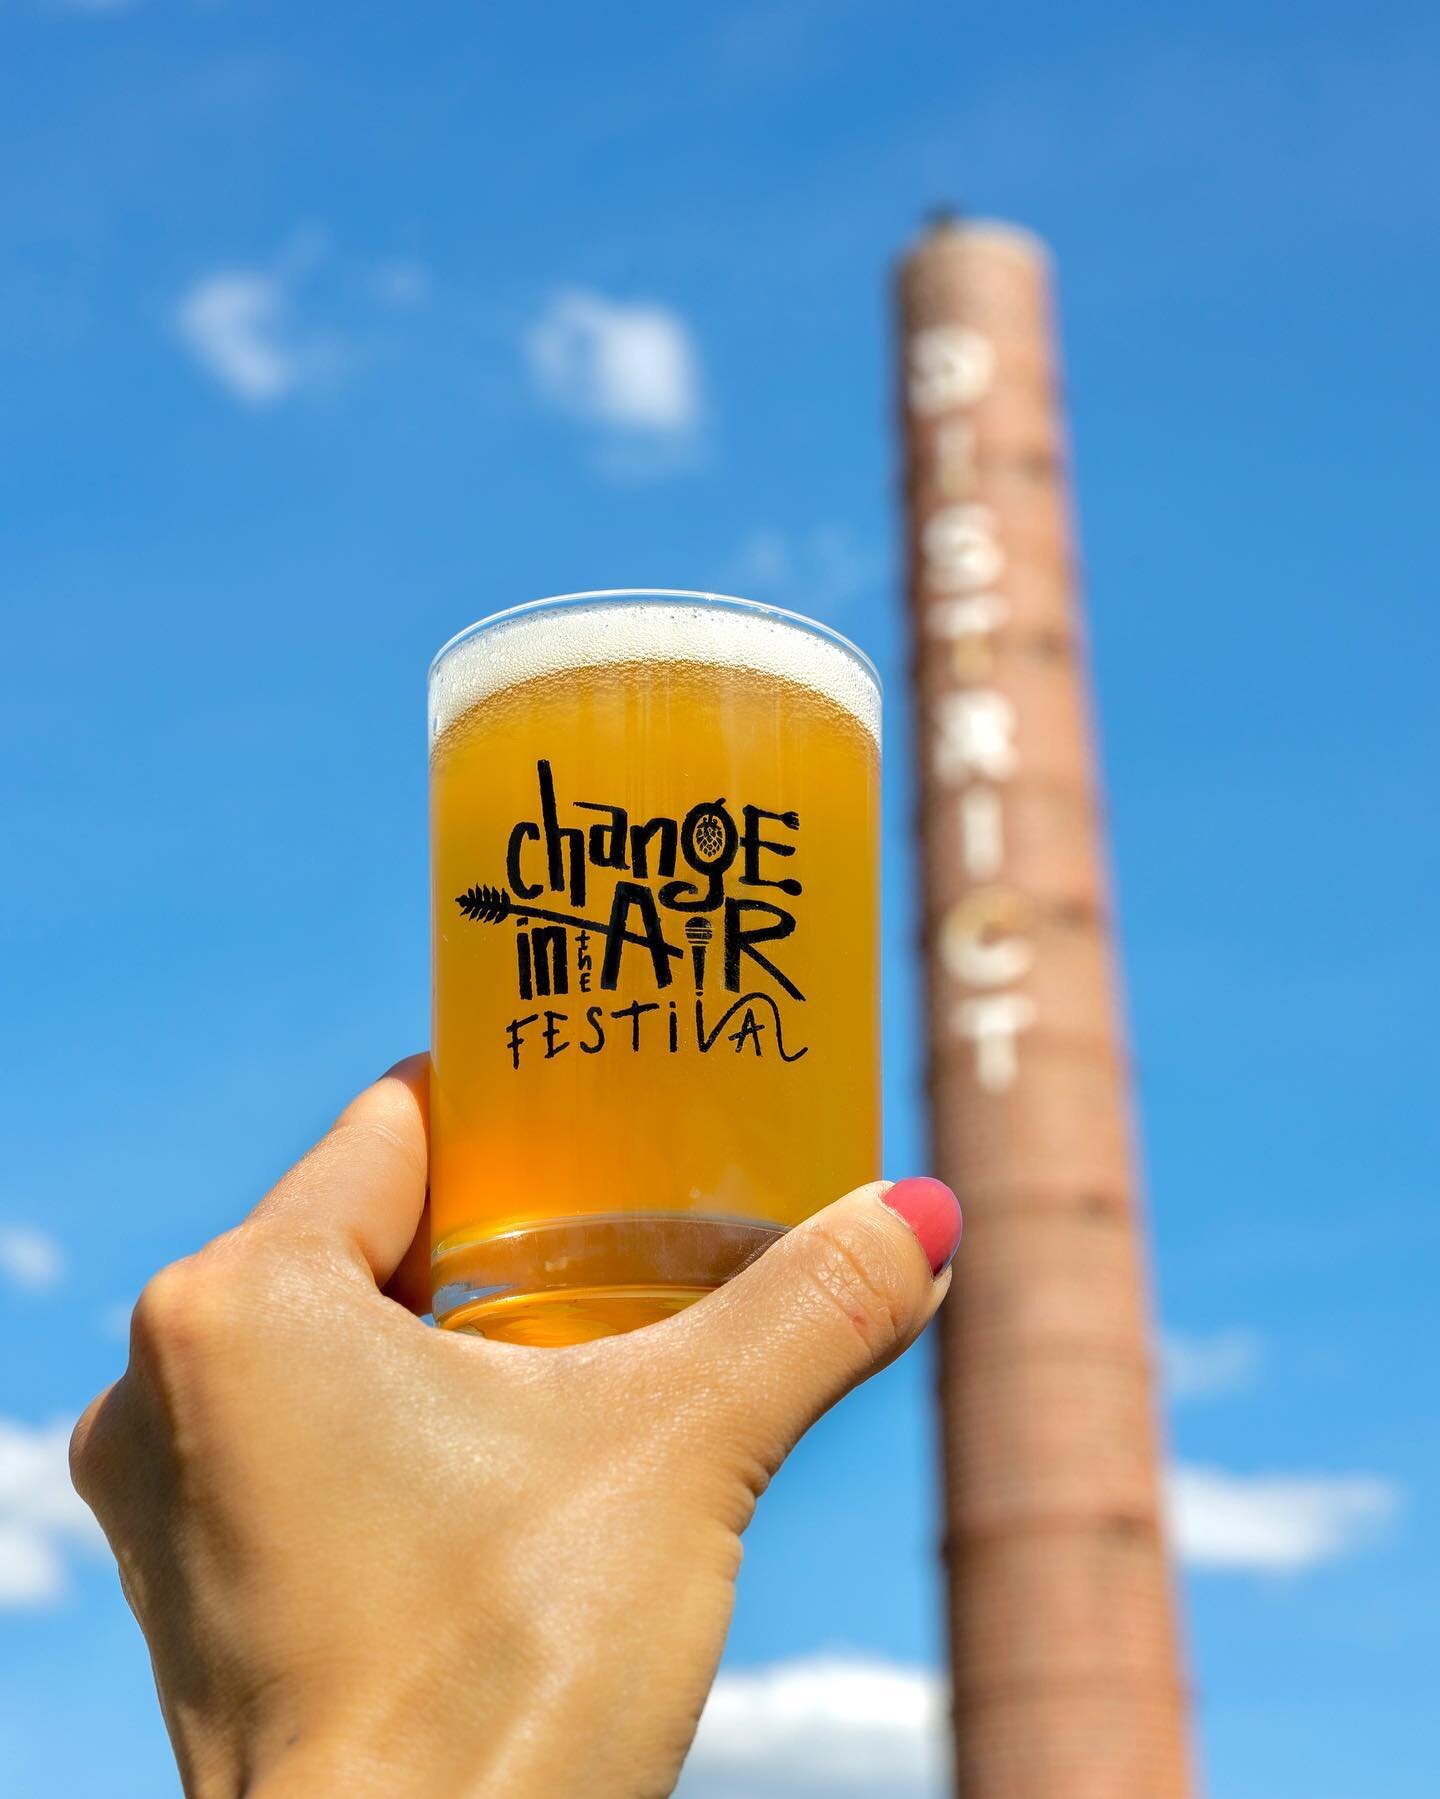 The only beer festival in CT where &ldquo;The Craft&rdquo; meets &ldquo;The Culture&rdquo;, CiTAFest is a celebration of Beer &amp; Black Culture! 🙌🏿

We LEVELED UP this year&hellip;
* LIVE music ALL DAY 
* LIVE ART including body painters
* FOOD
*